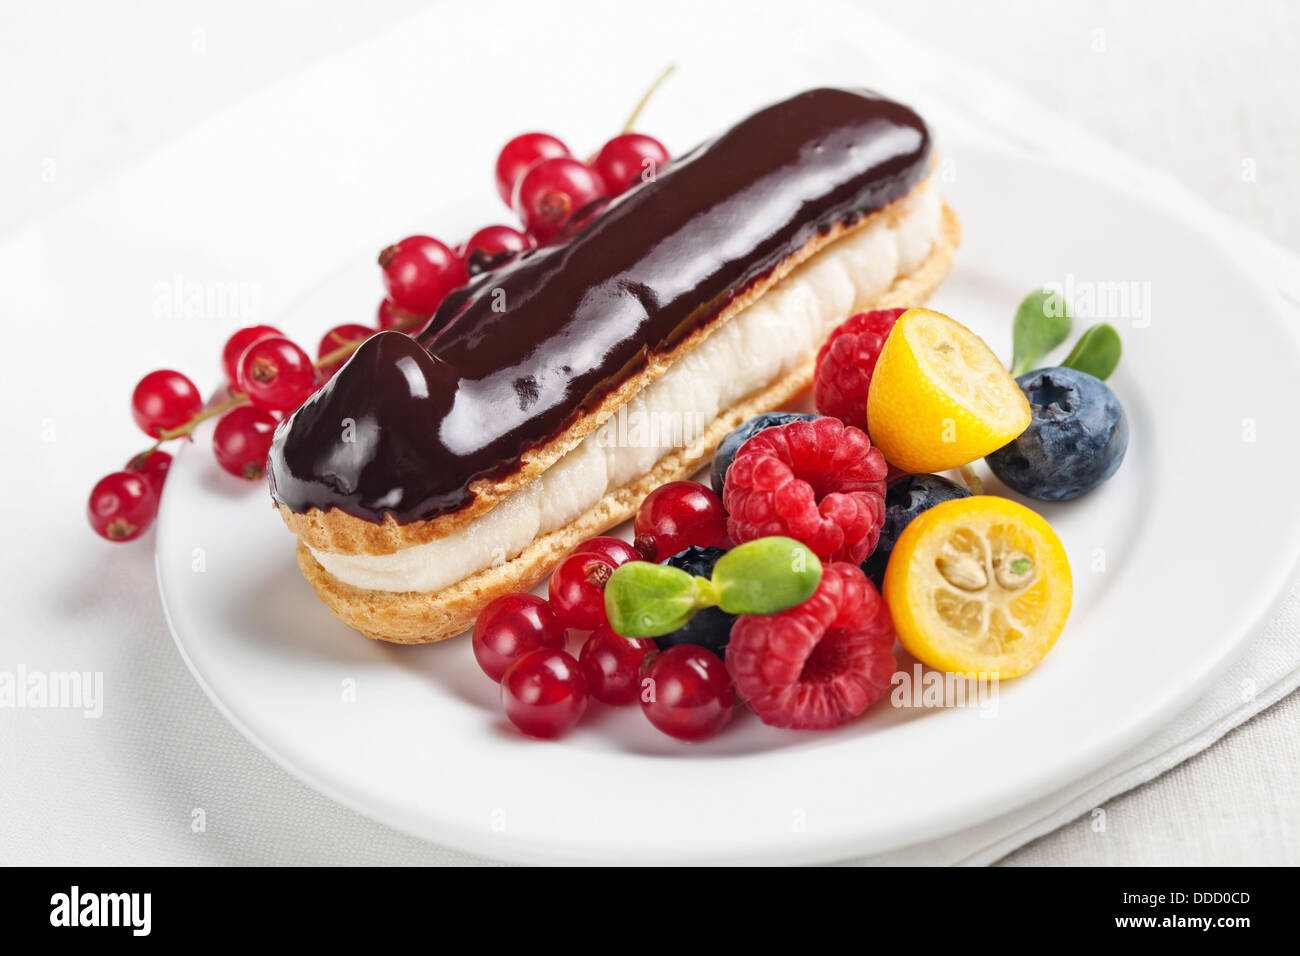 Chocolate eclair with berries on white plate Stock Photo